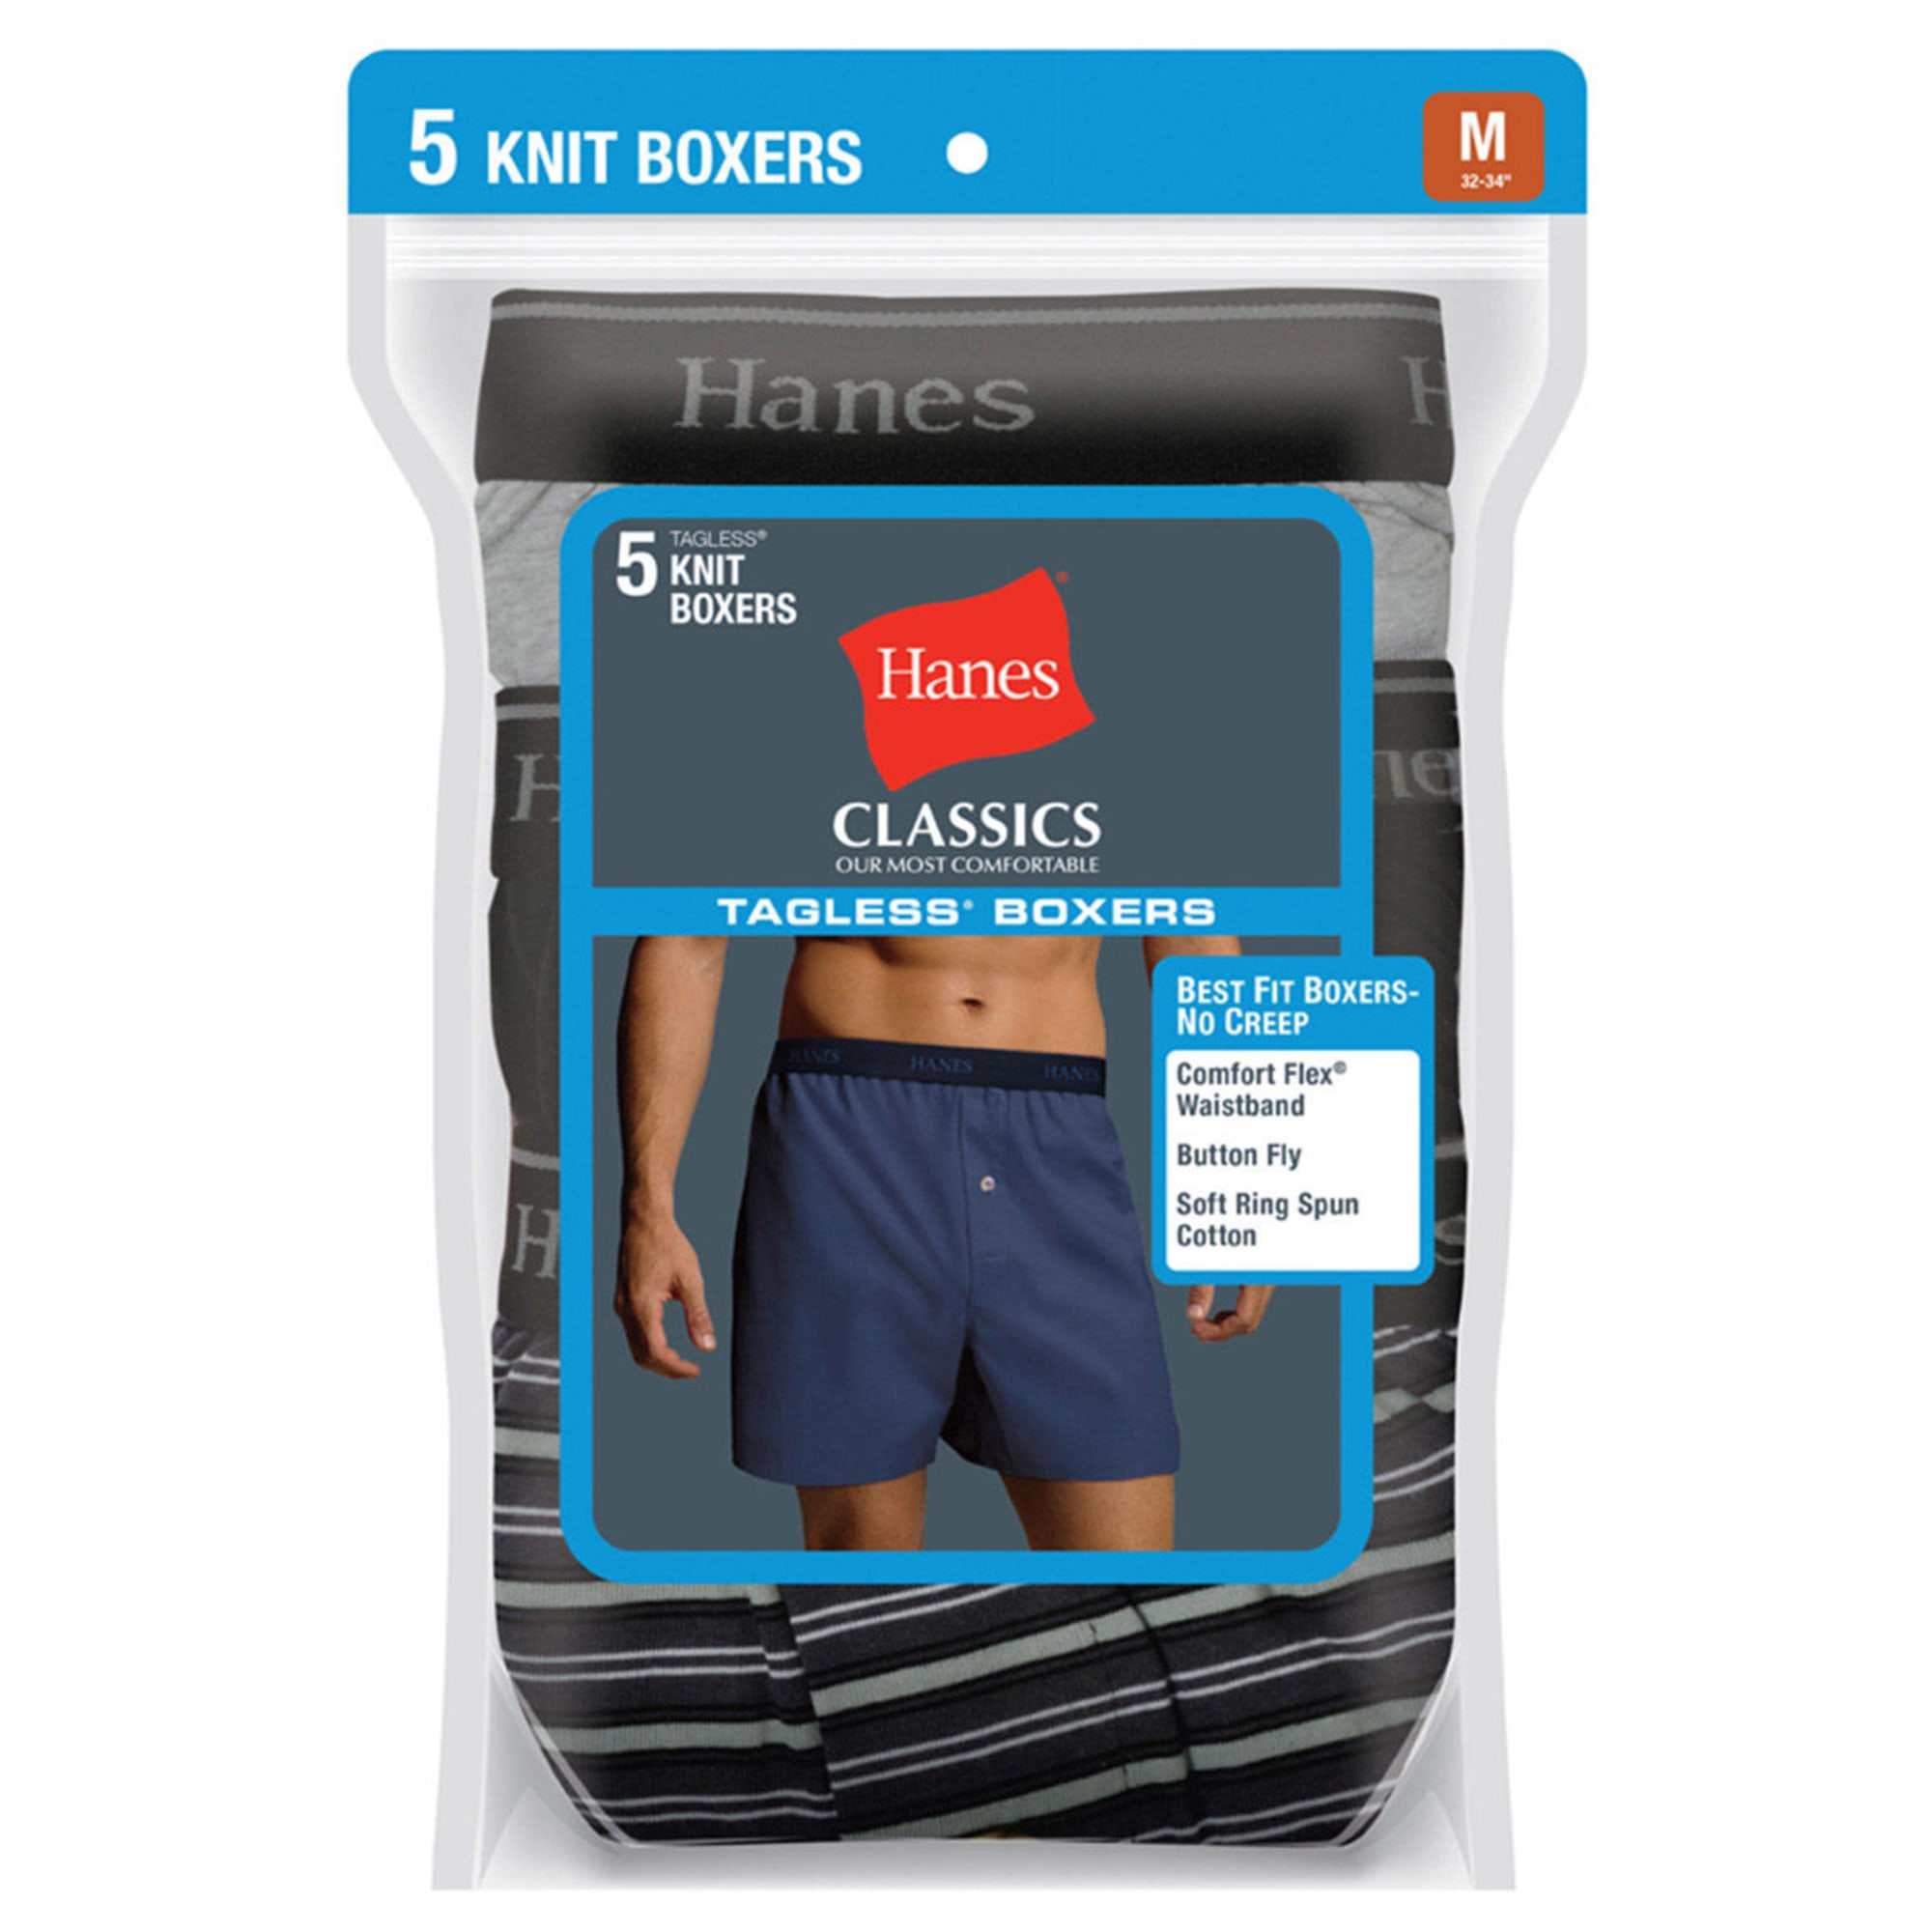 HANES Men's Classics Tagless Knit Boxers, 5-Pack - Eastern